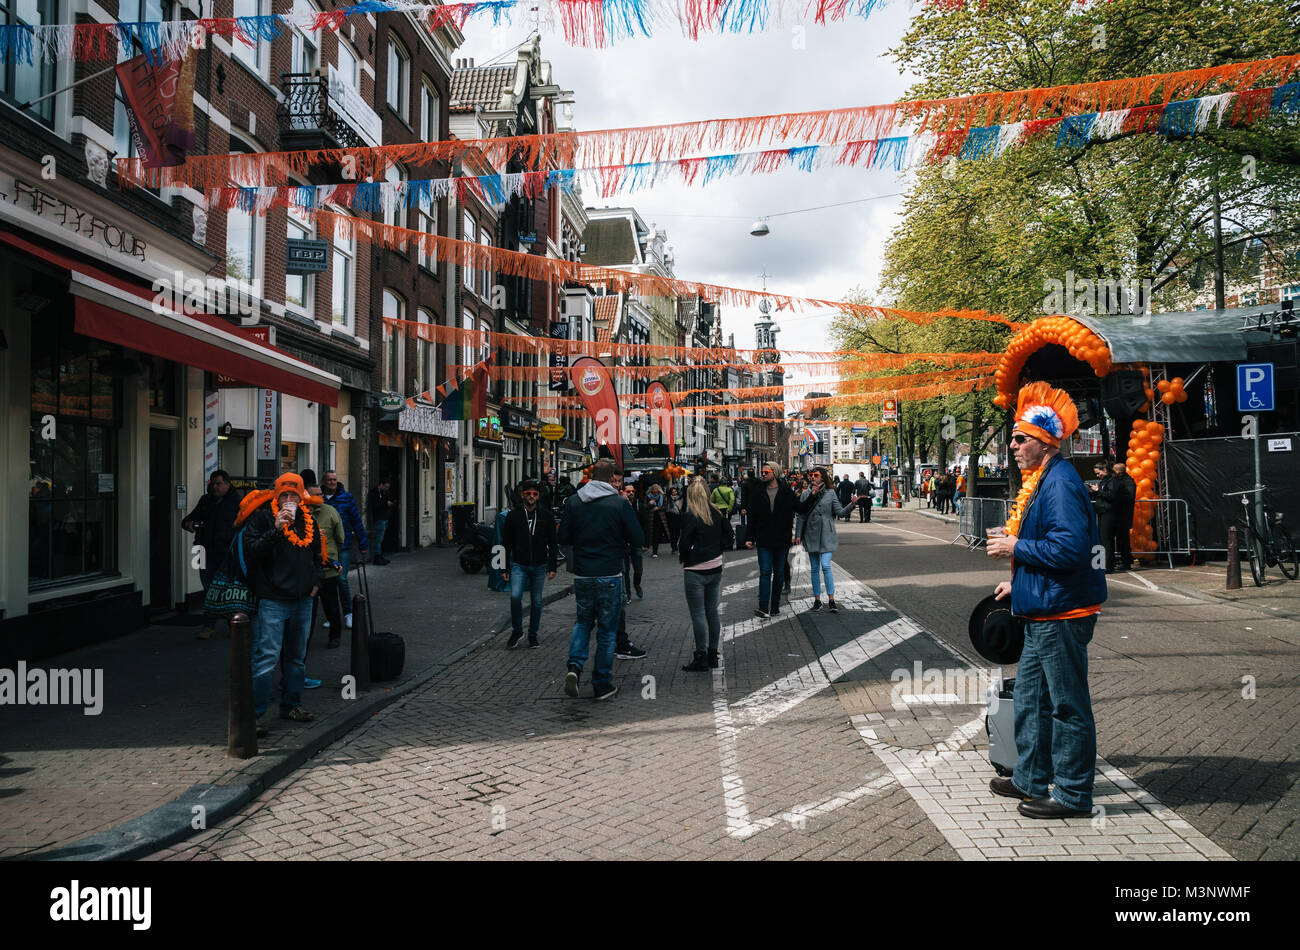 Amsterdam, Netherlands - 27 April, 2017: Streets of Amsterdam with orange decorations full of people in orange during the celebration of kings day. Ma Stock Photo